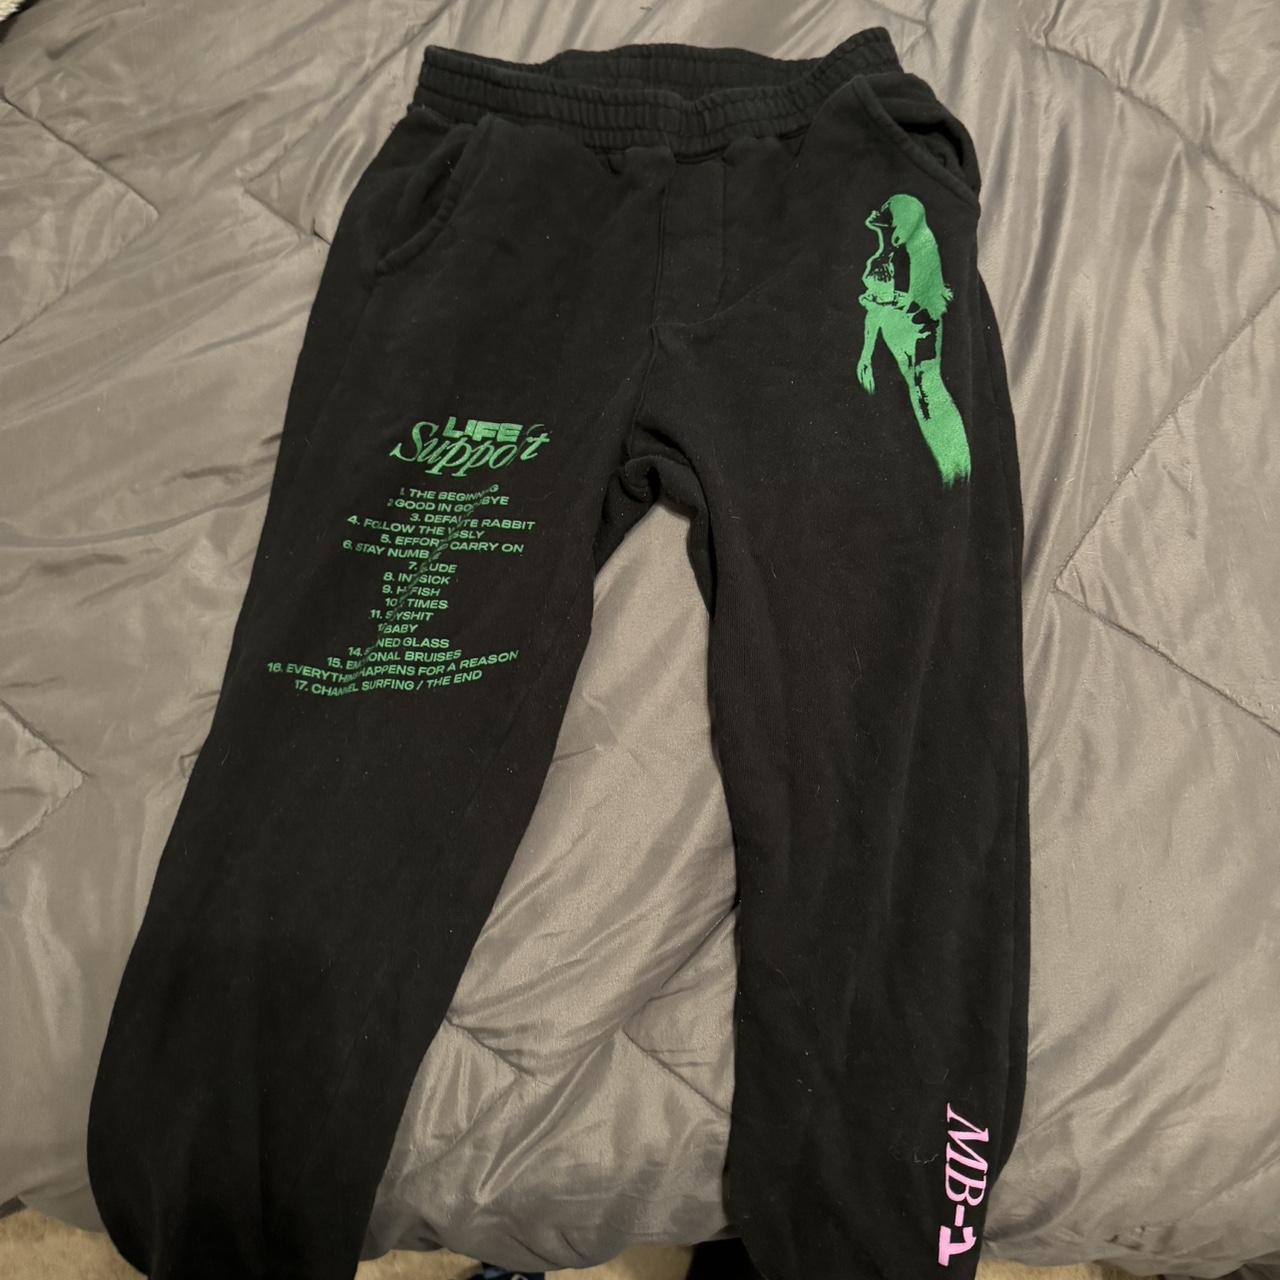 madison beer life support tour sweatpants - comes... - Depop